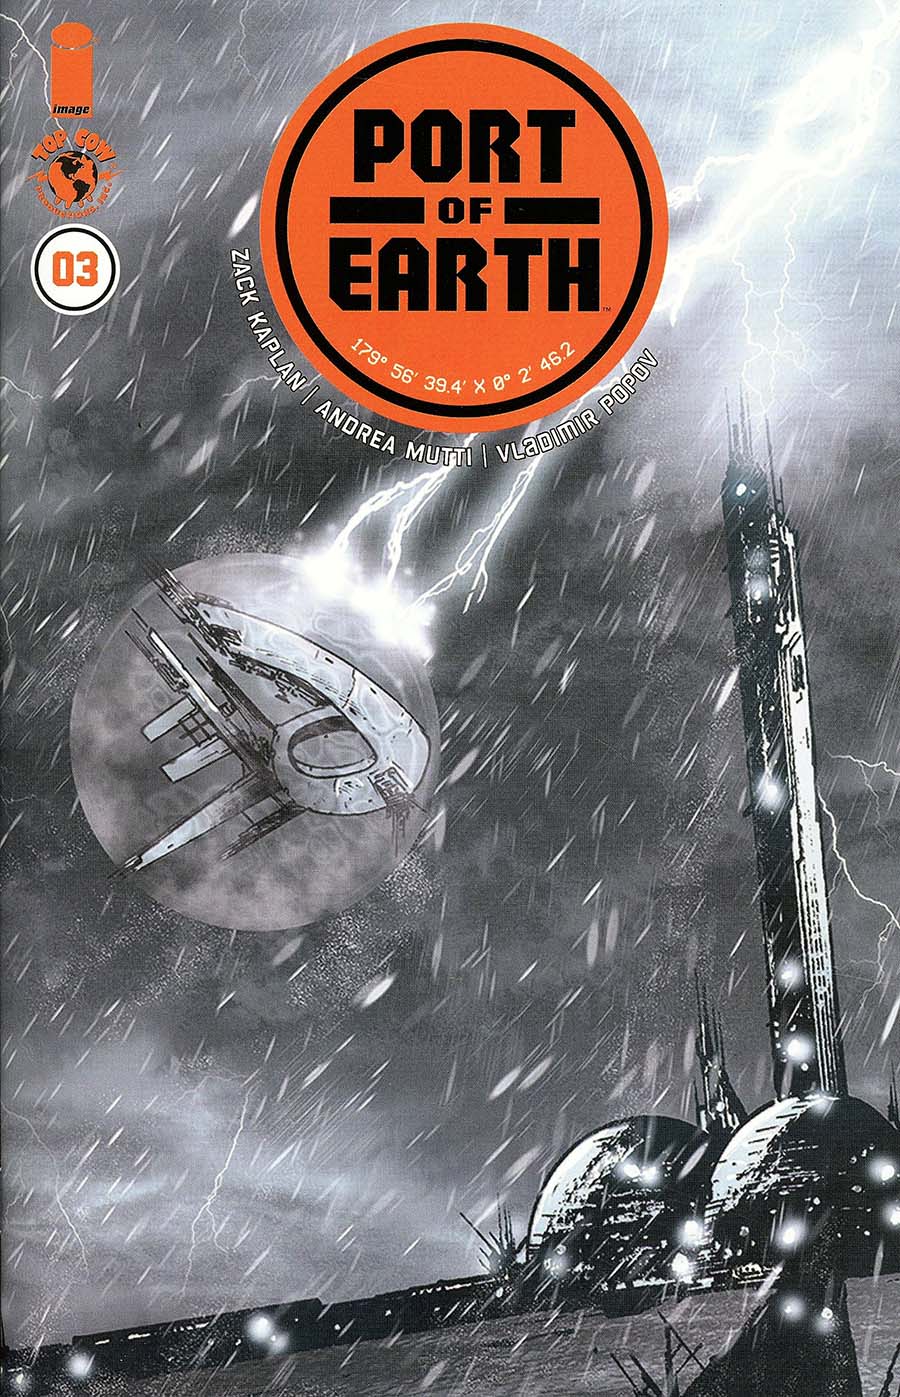 Port Of Earth #3